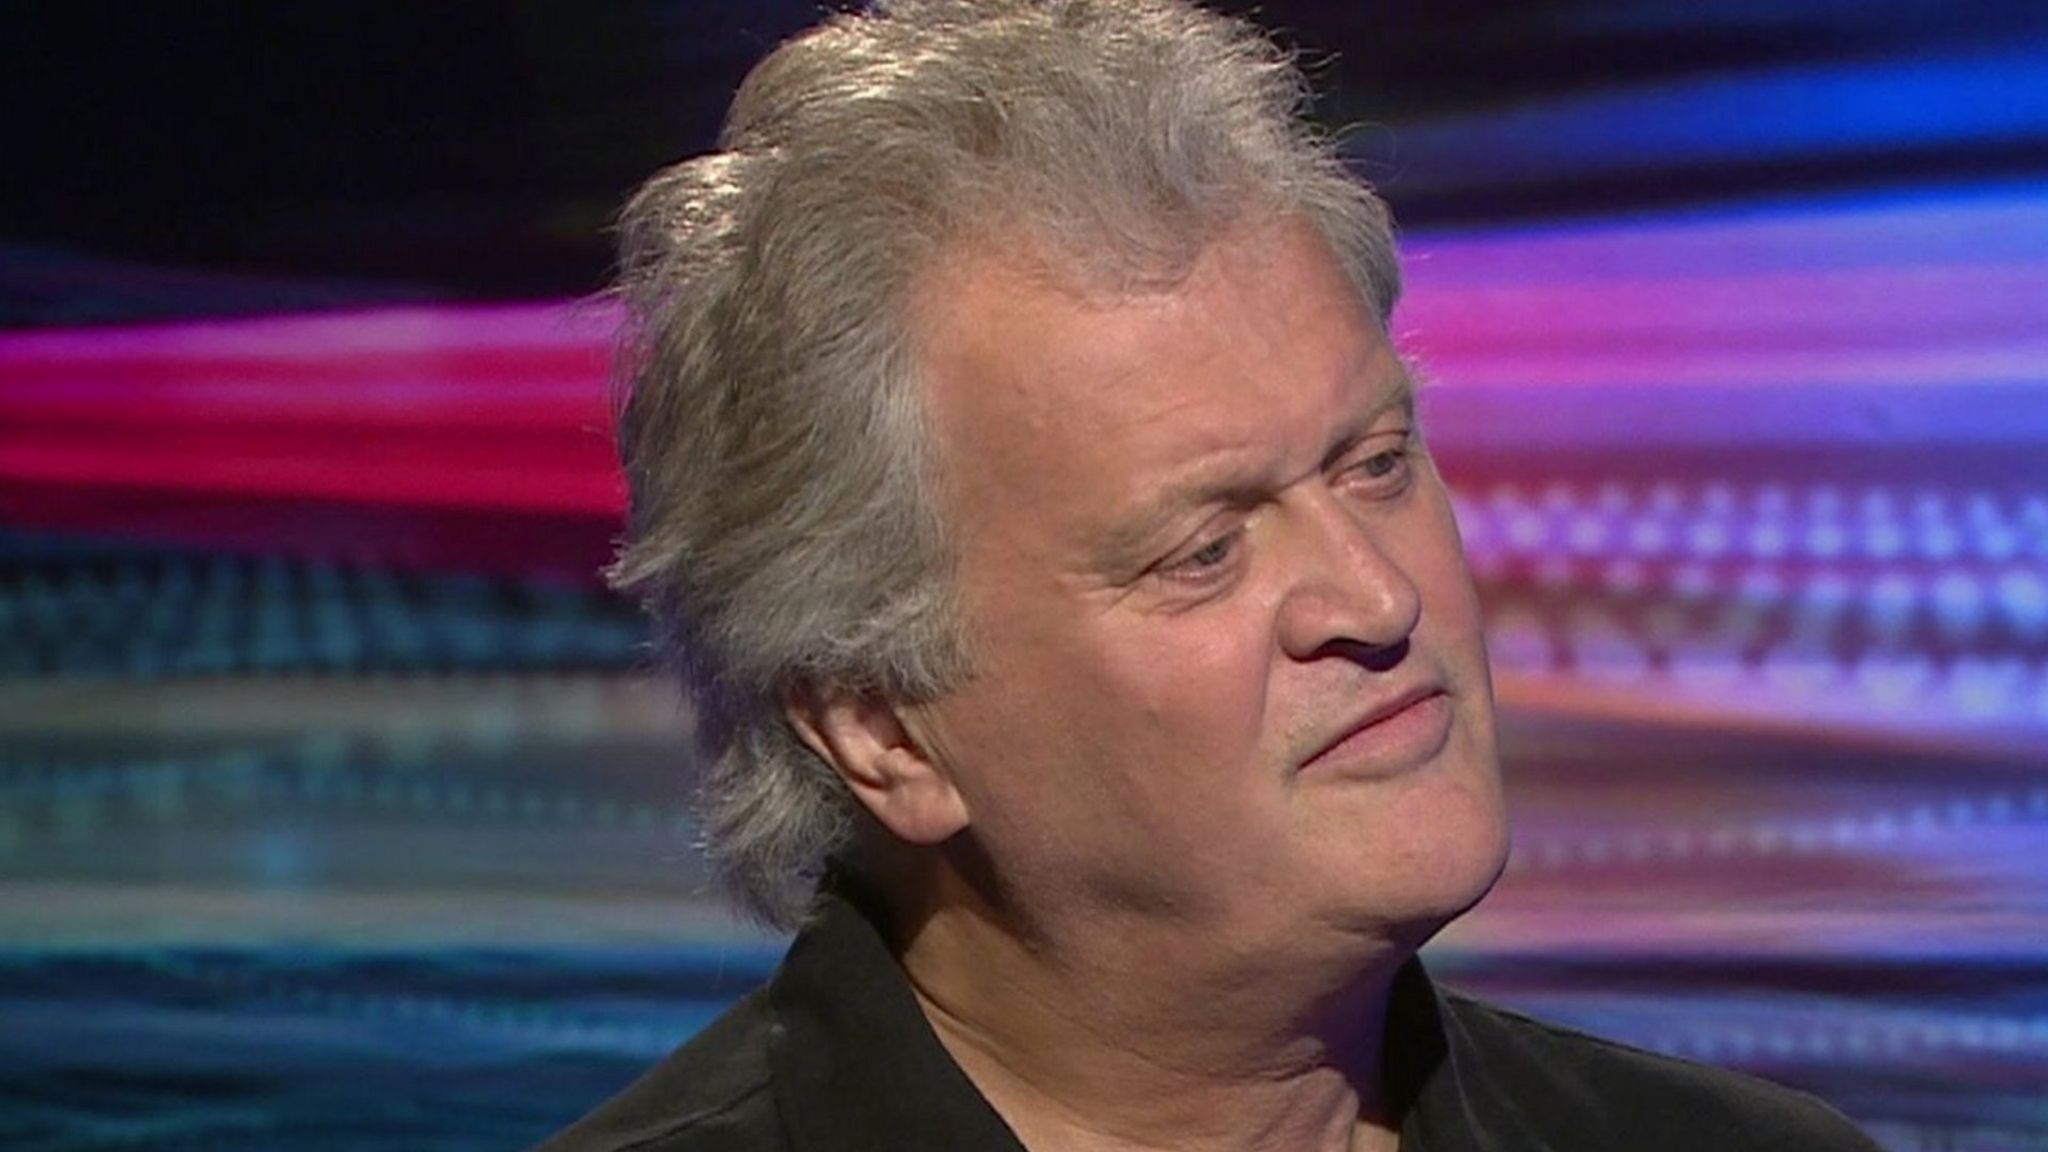 Tim Martin, founder and chairman of the pub chain JD Wetherspoon